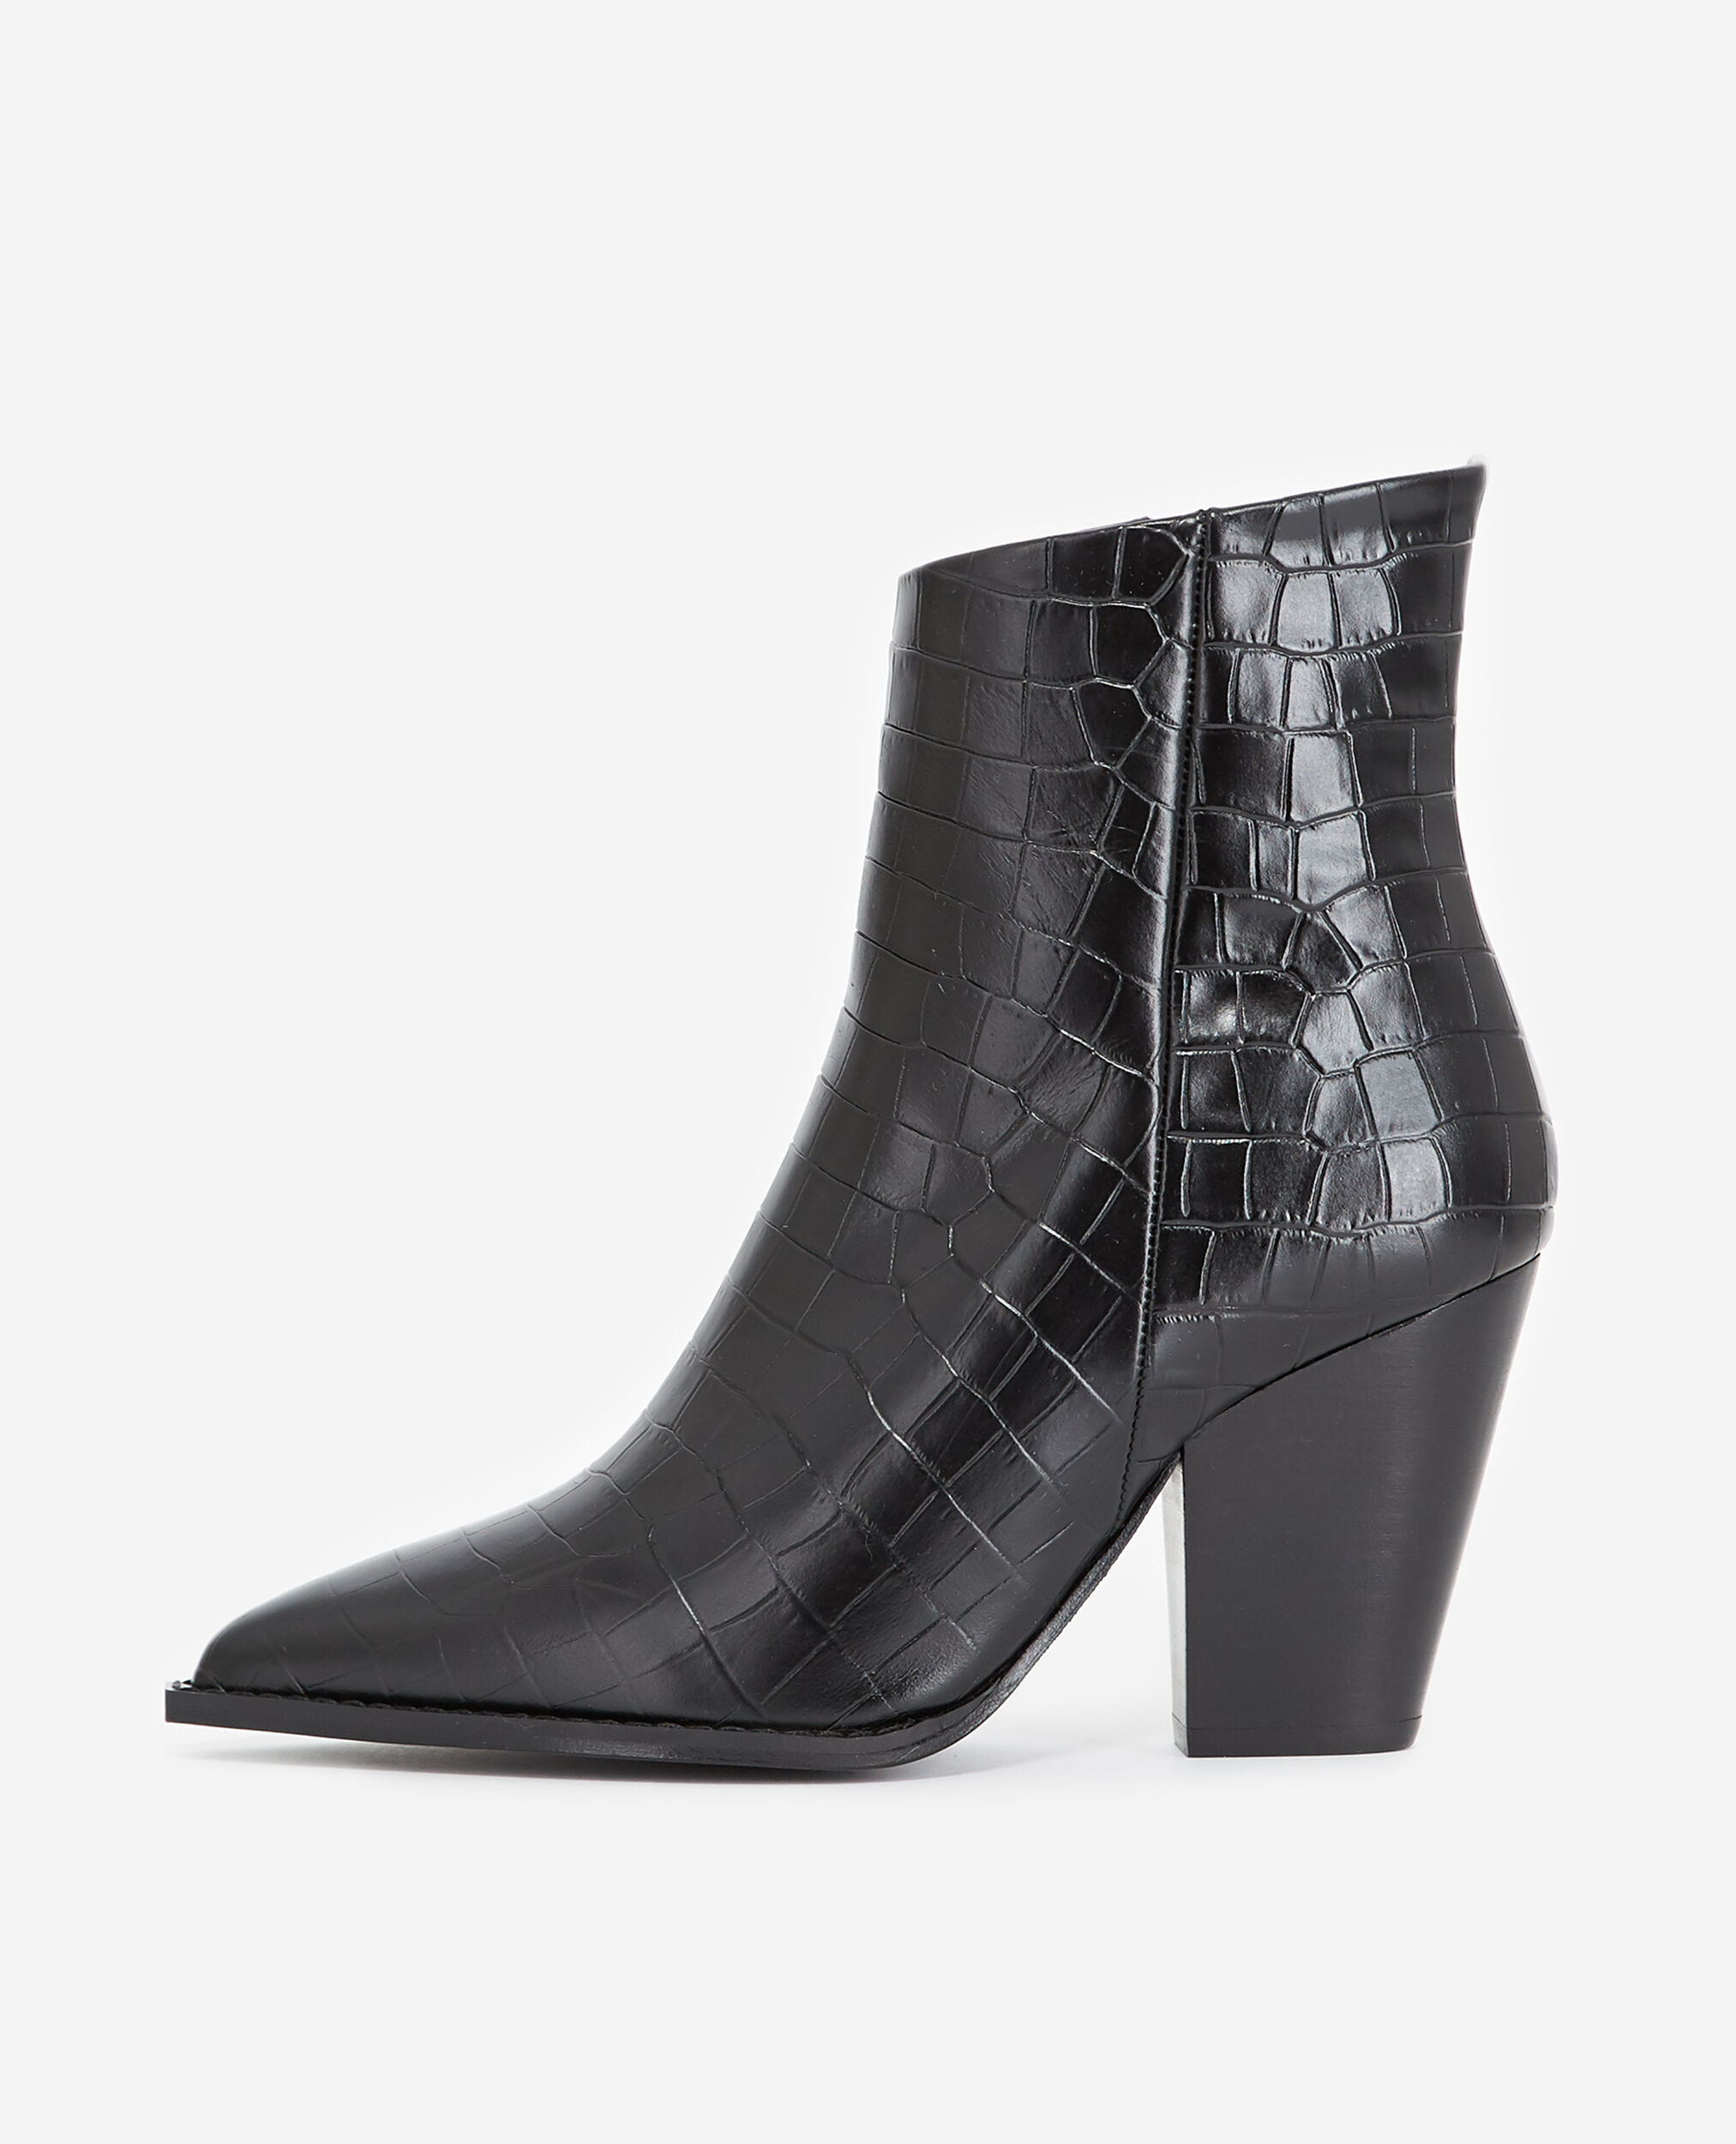 Heeled croc-effect black leather ankle boots | The Kooples